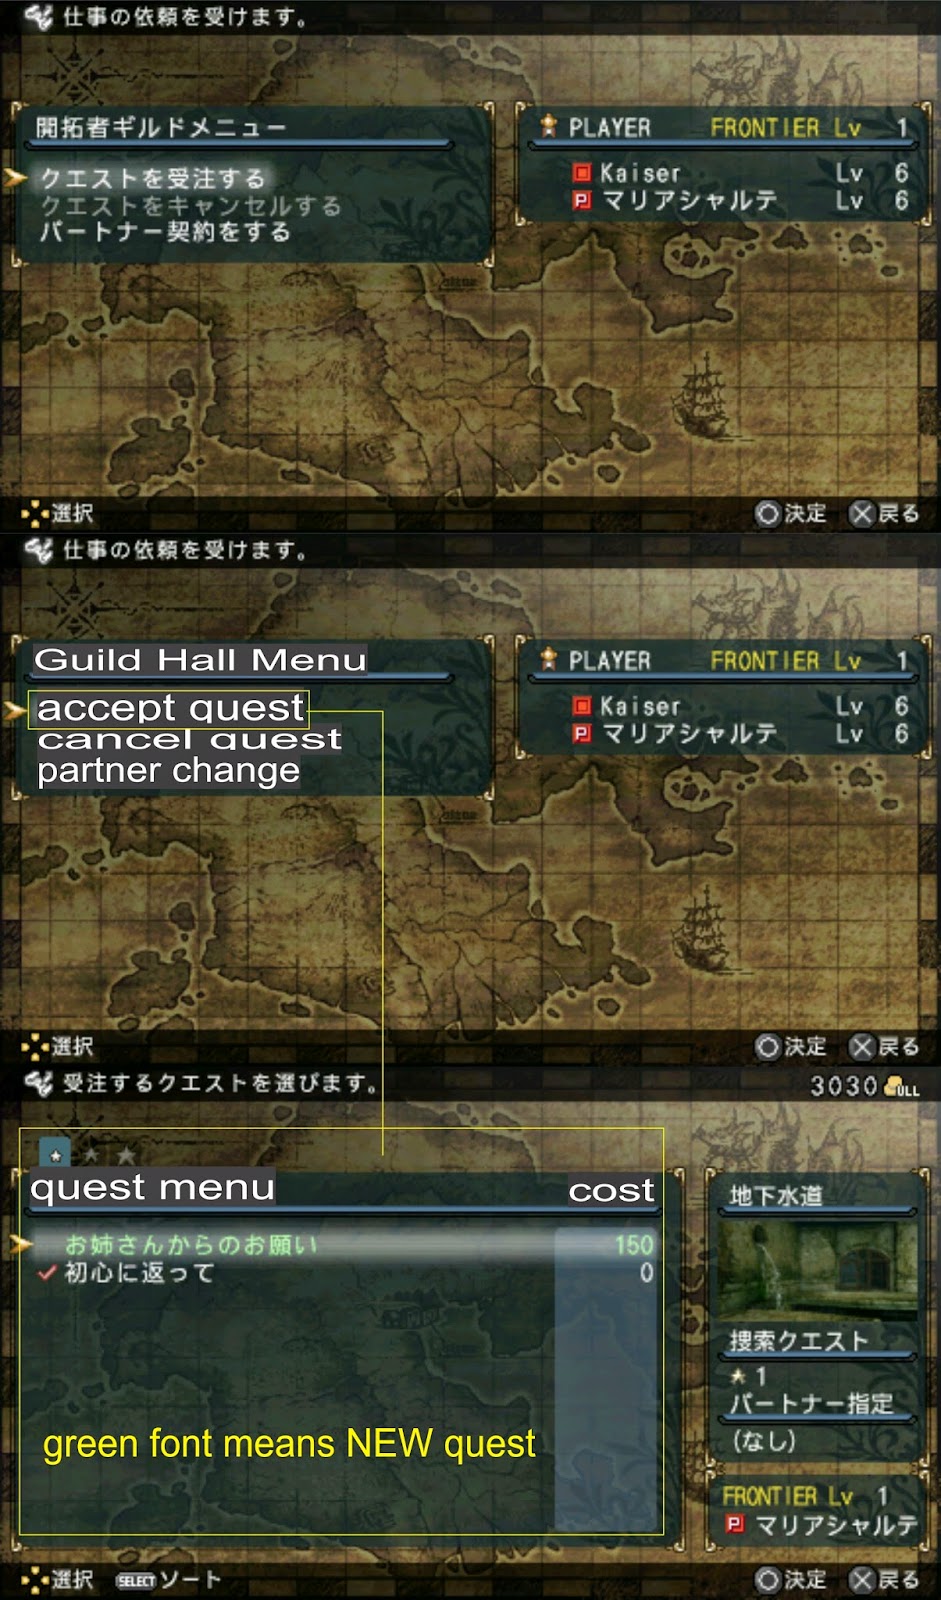 Frontier Gate Boost+ Simple Image Guide: Guild Hall